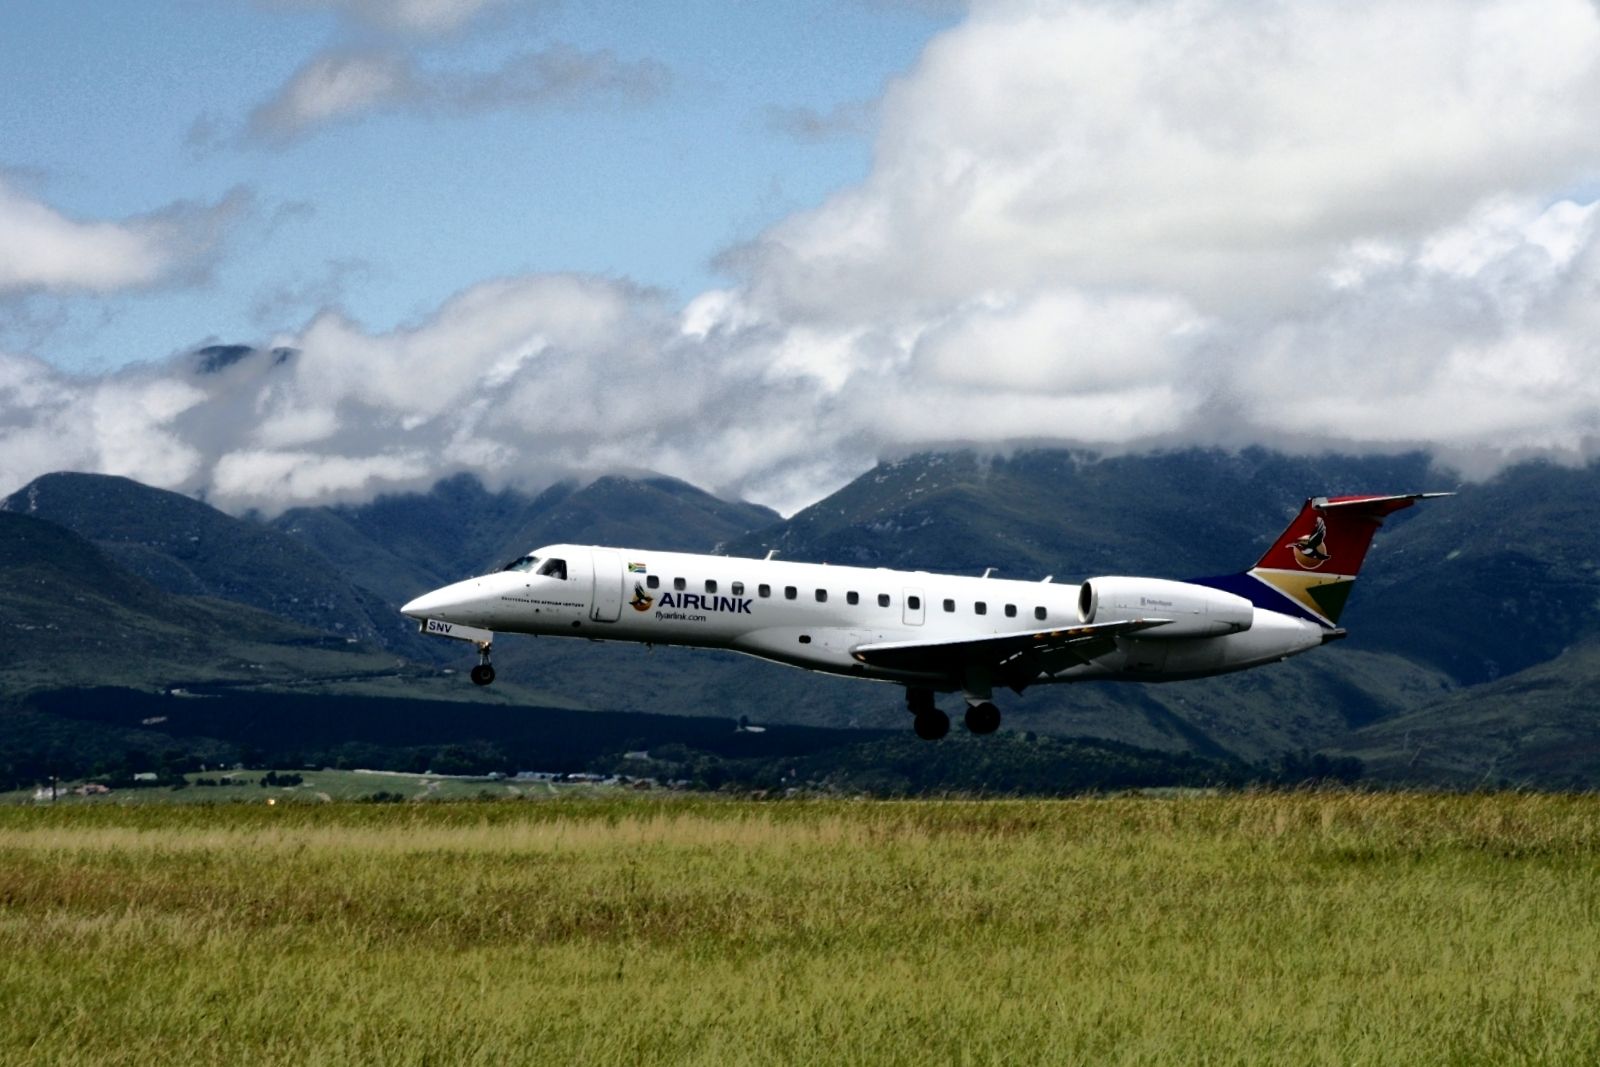 Airlink aircraft taking off